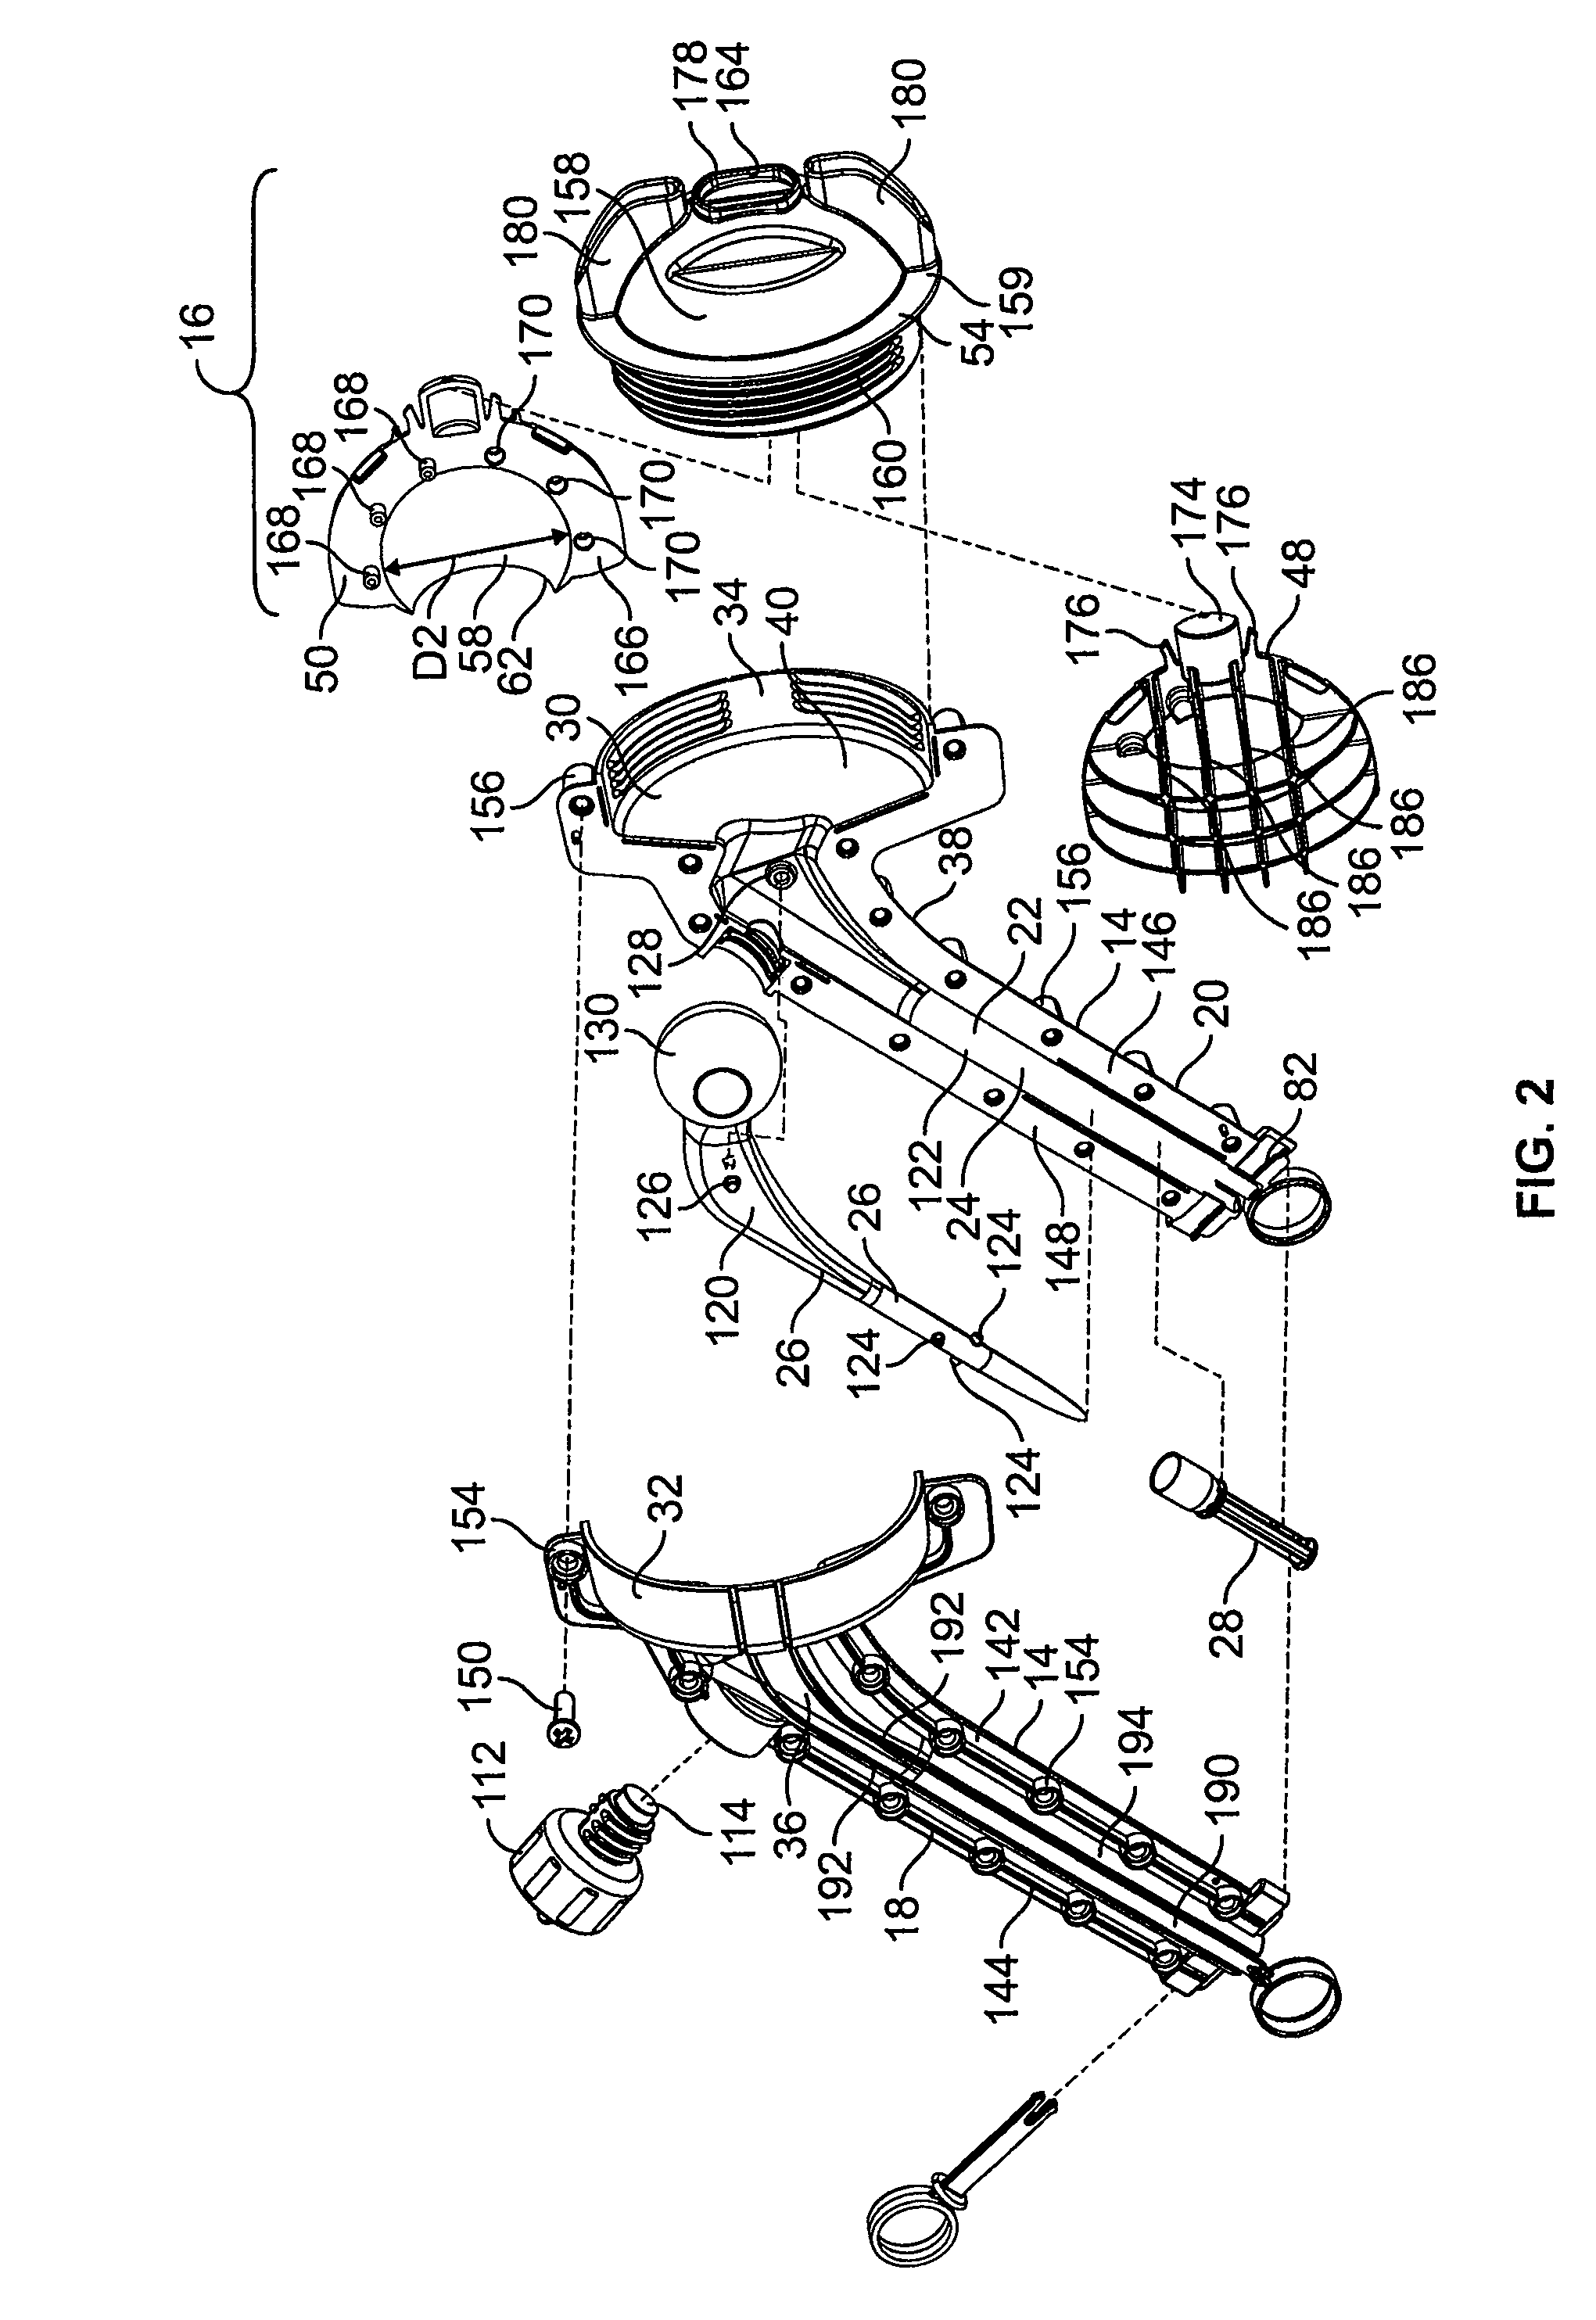 Spacer mold and methods therefor